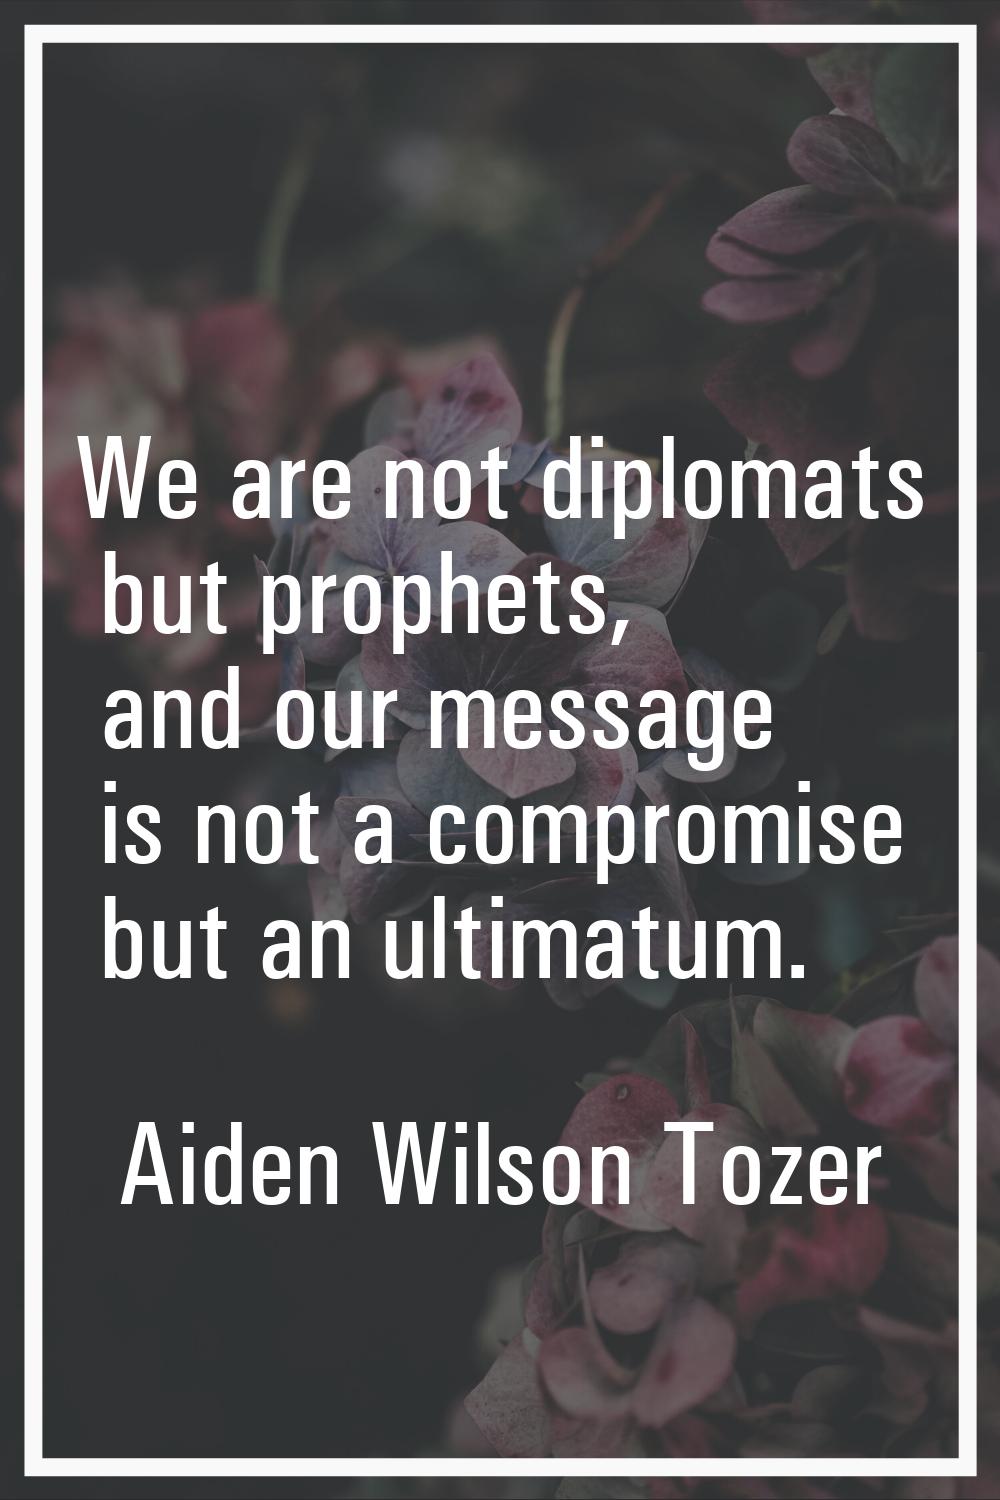 We are not diplomats but prophets, and our message is not a compromise but an ultimatum.